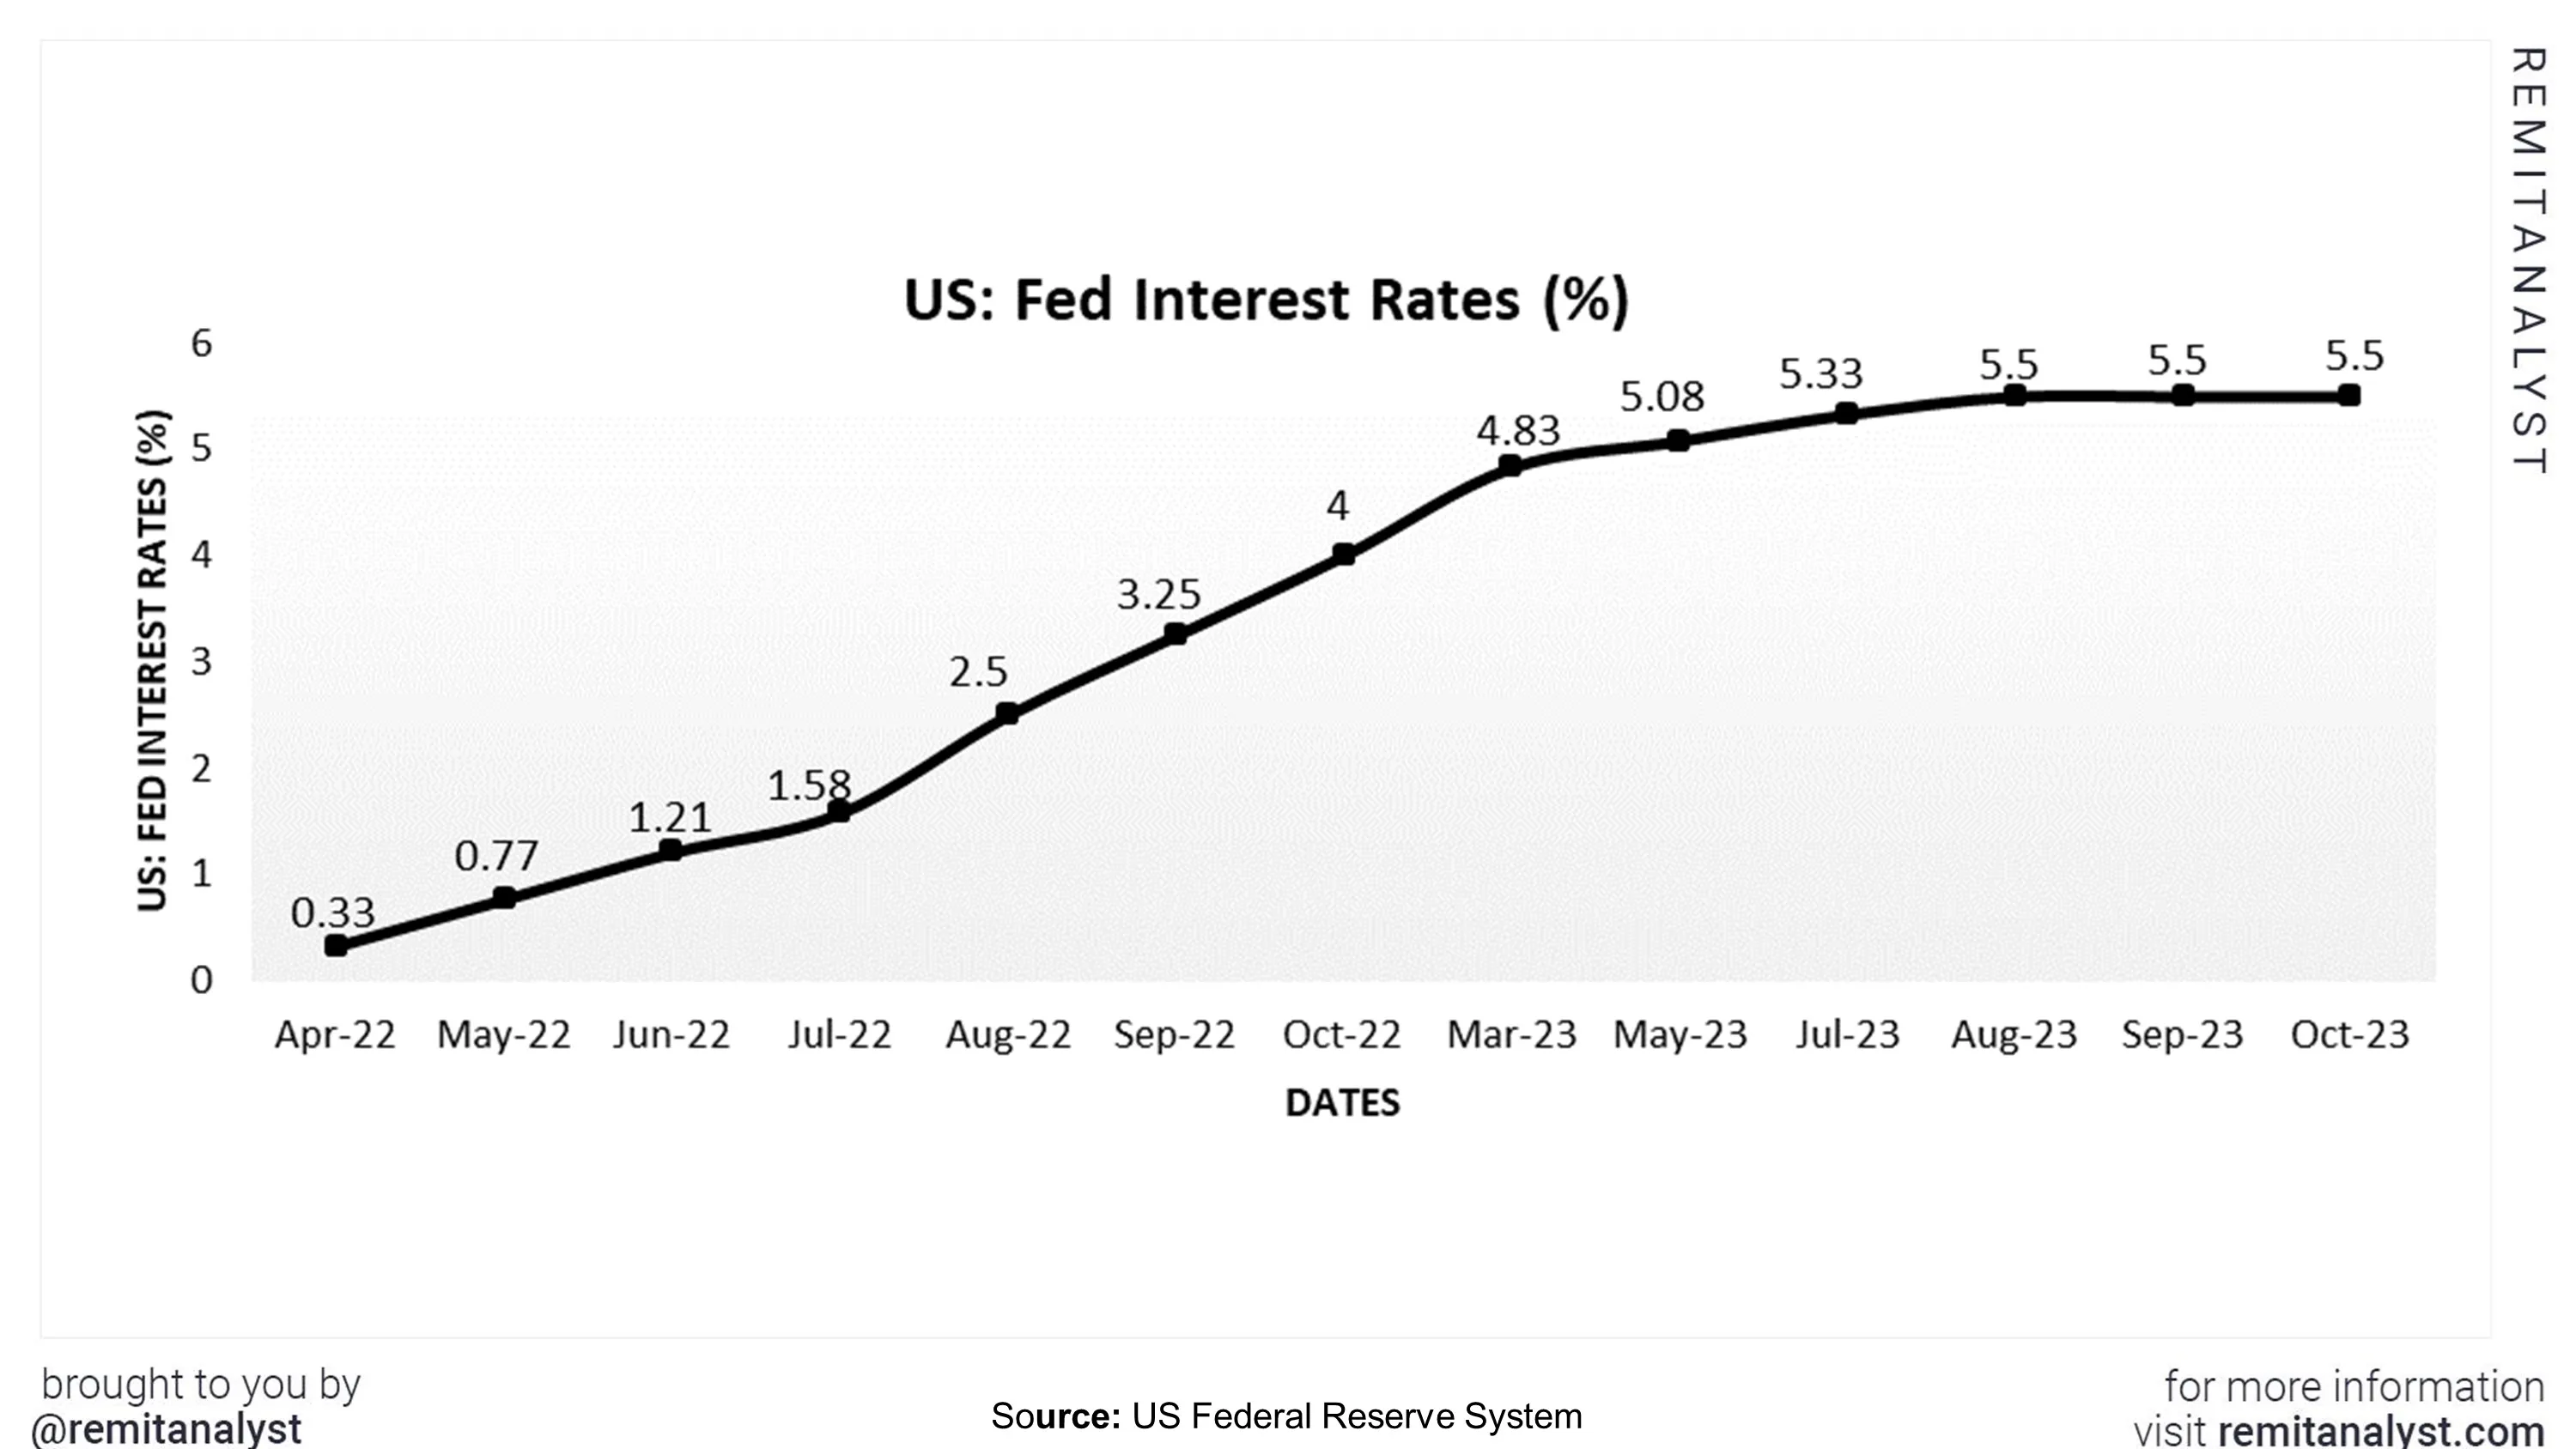 interest-rates-in-us-from-apr-2021-to-oct-2023